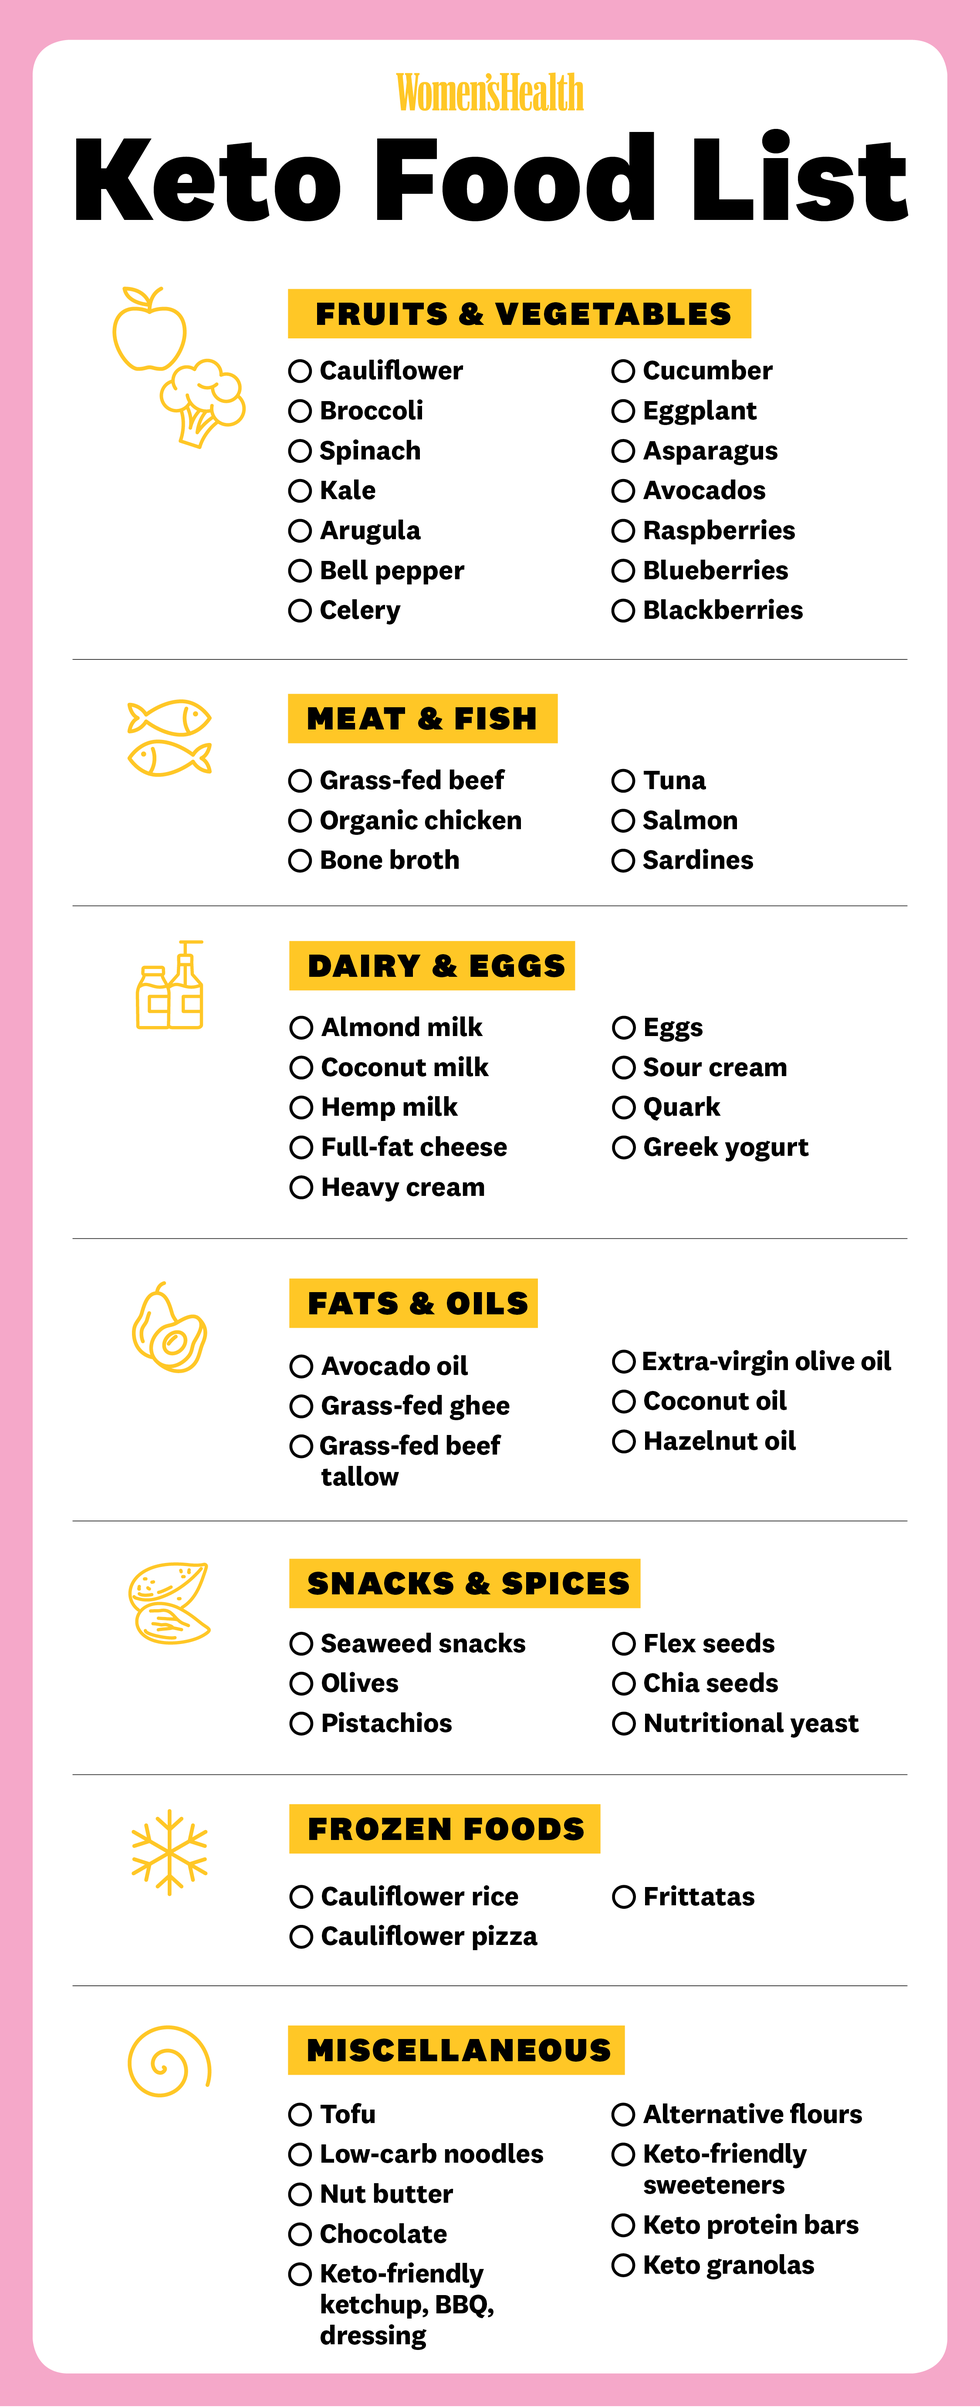 Complete Keto Diet Food List For Beginners – 31 Must-Have Items